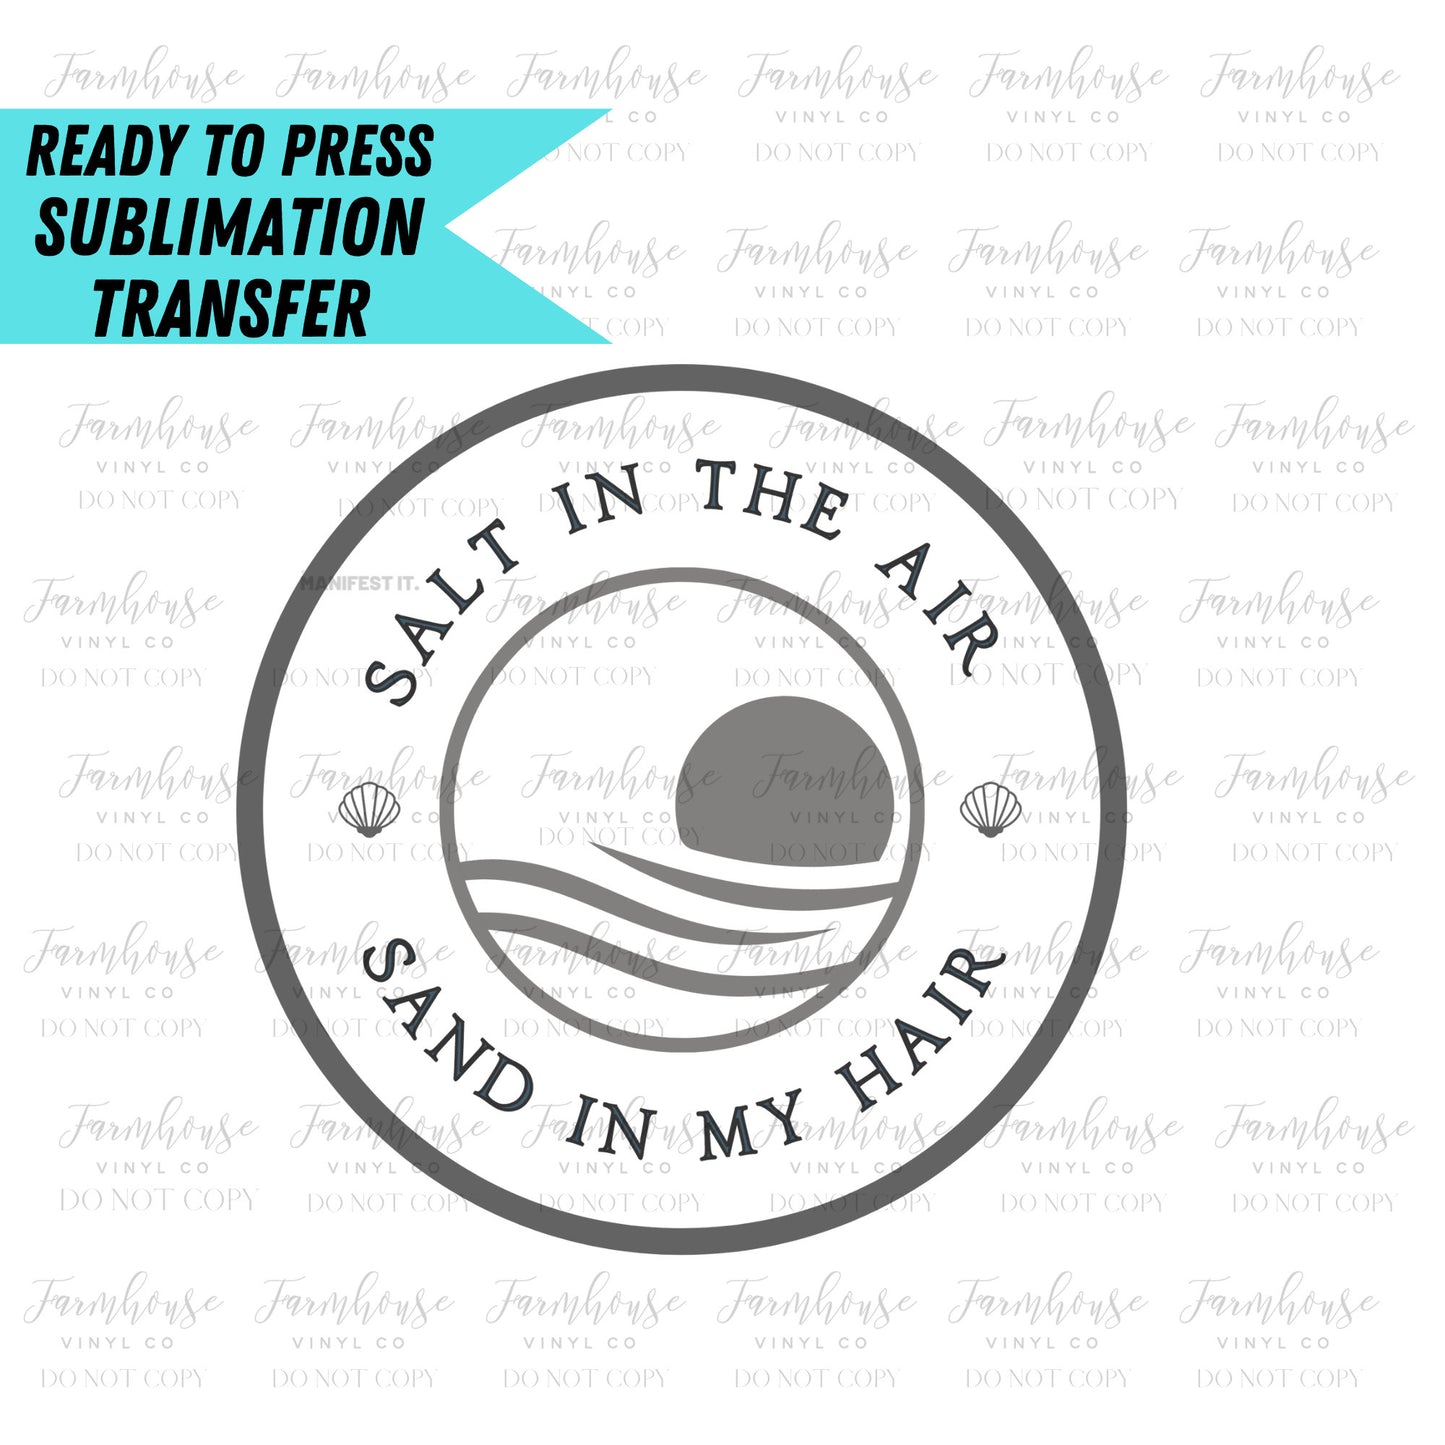 Life is Better At The Beach, Ready to Press Sublimation Transfer, Sublimation Prints, Salt in The Air Sand in My Hair, Beach Little Things - Farmhouse Vinyl Co